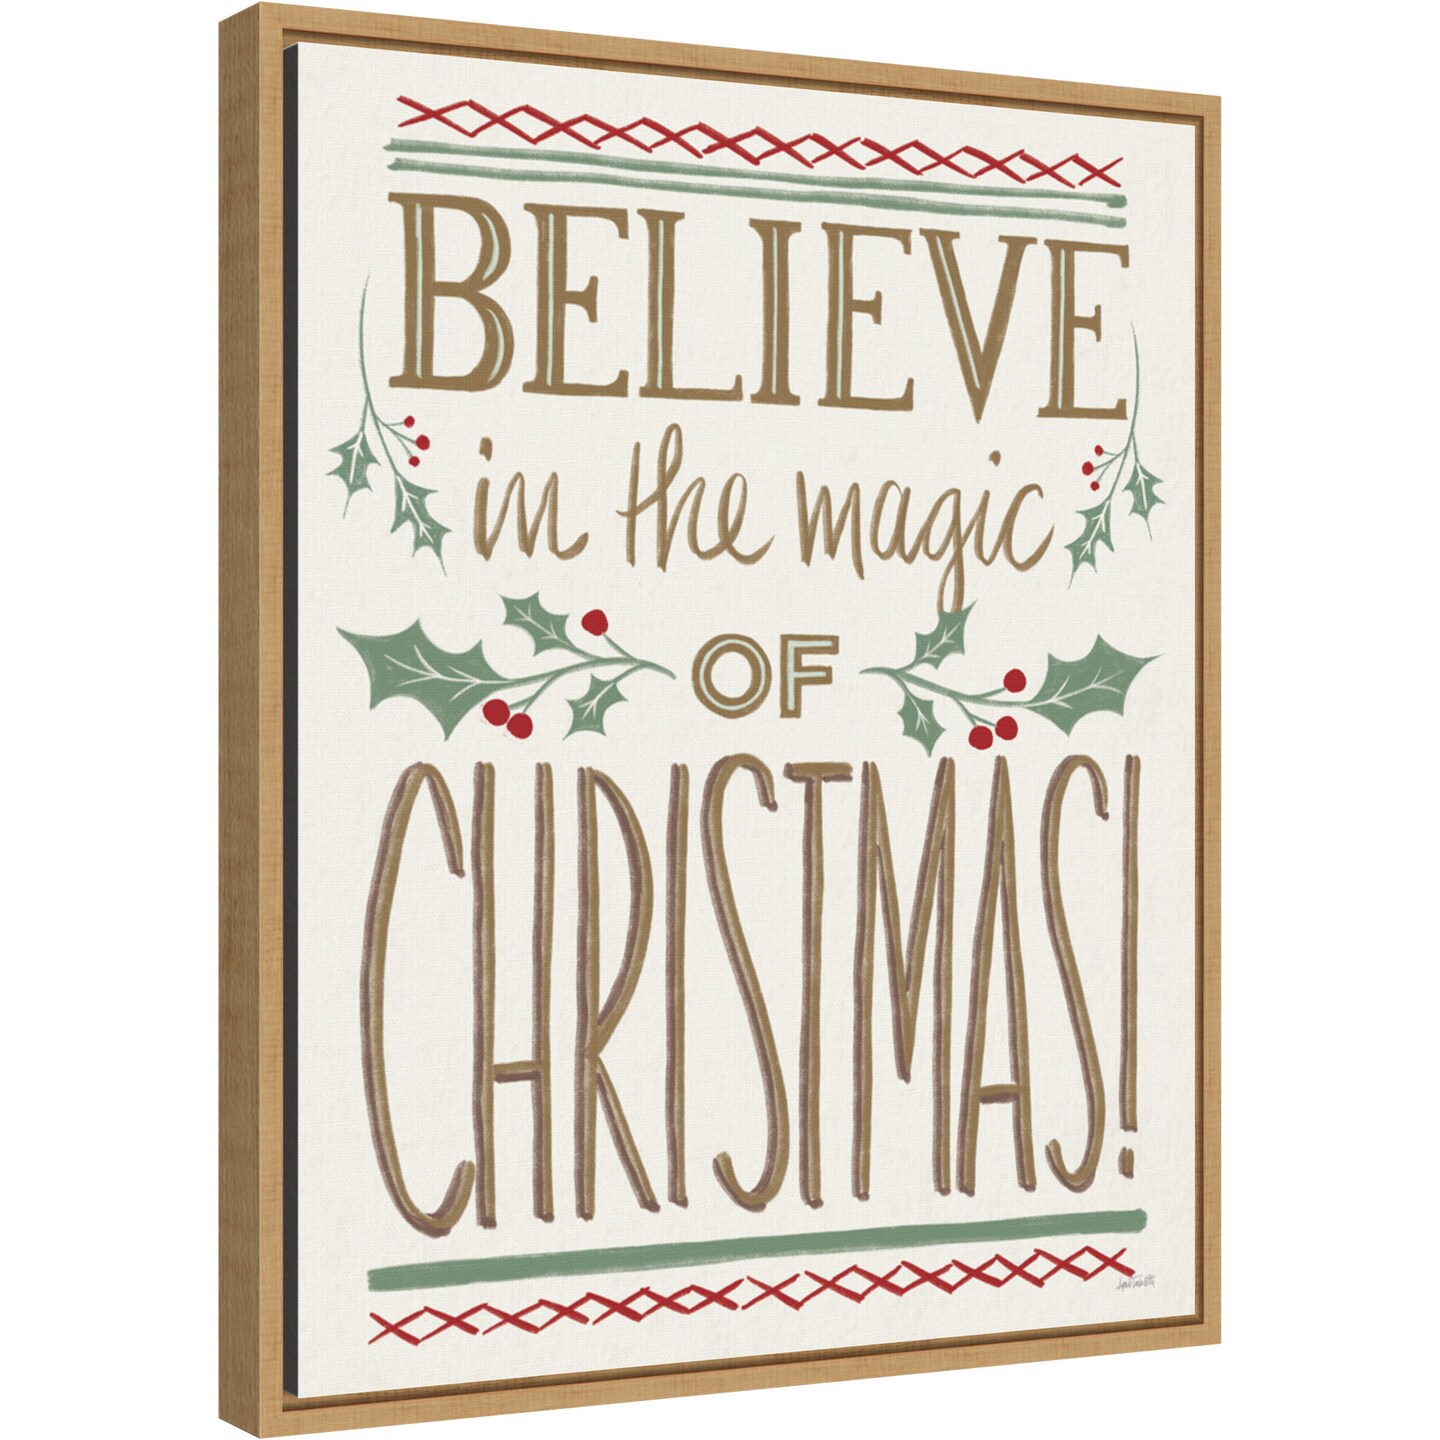 Believe in the Magic of Christmas by Anne Tavoletti 16-in. W x 20-in. H. Canvas Wall Art Print Framed in Natural